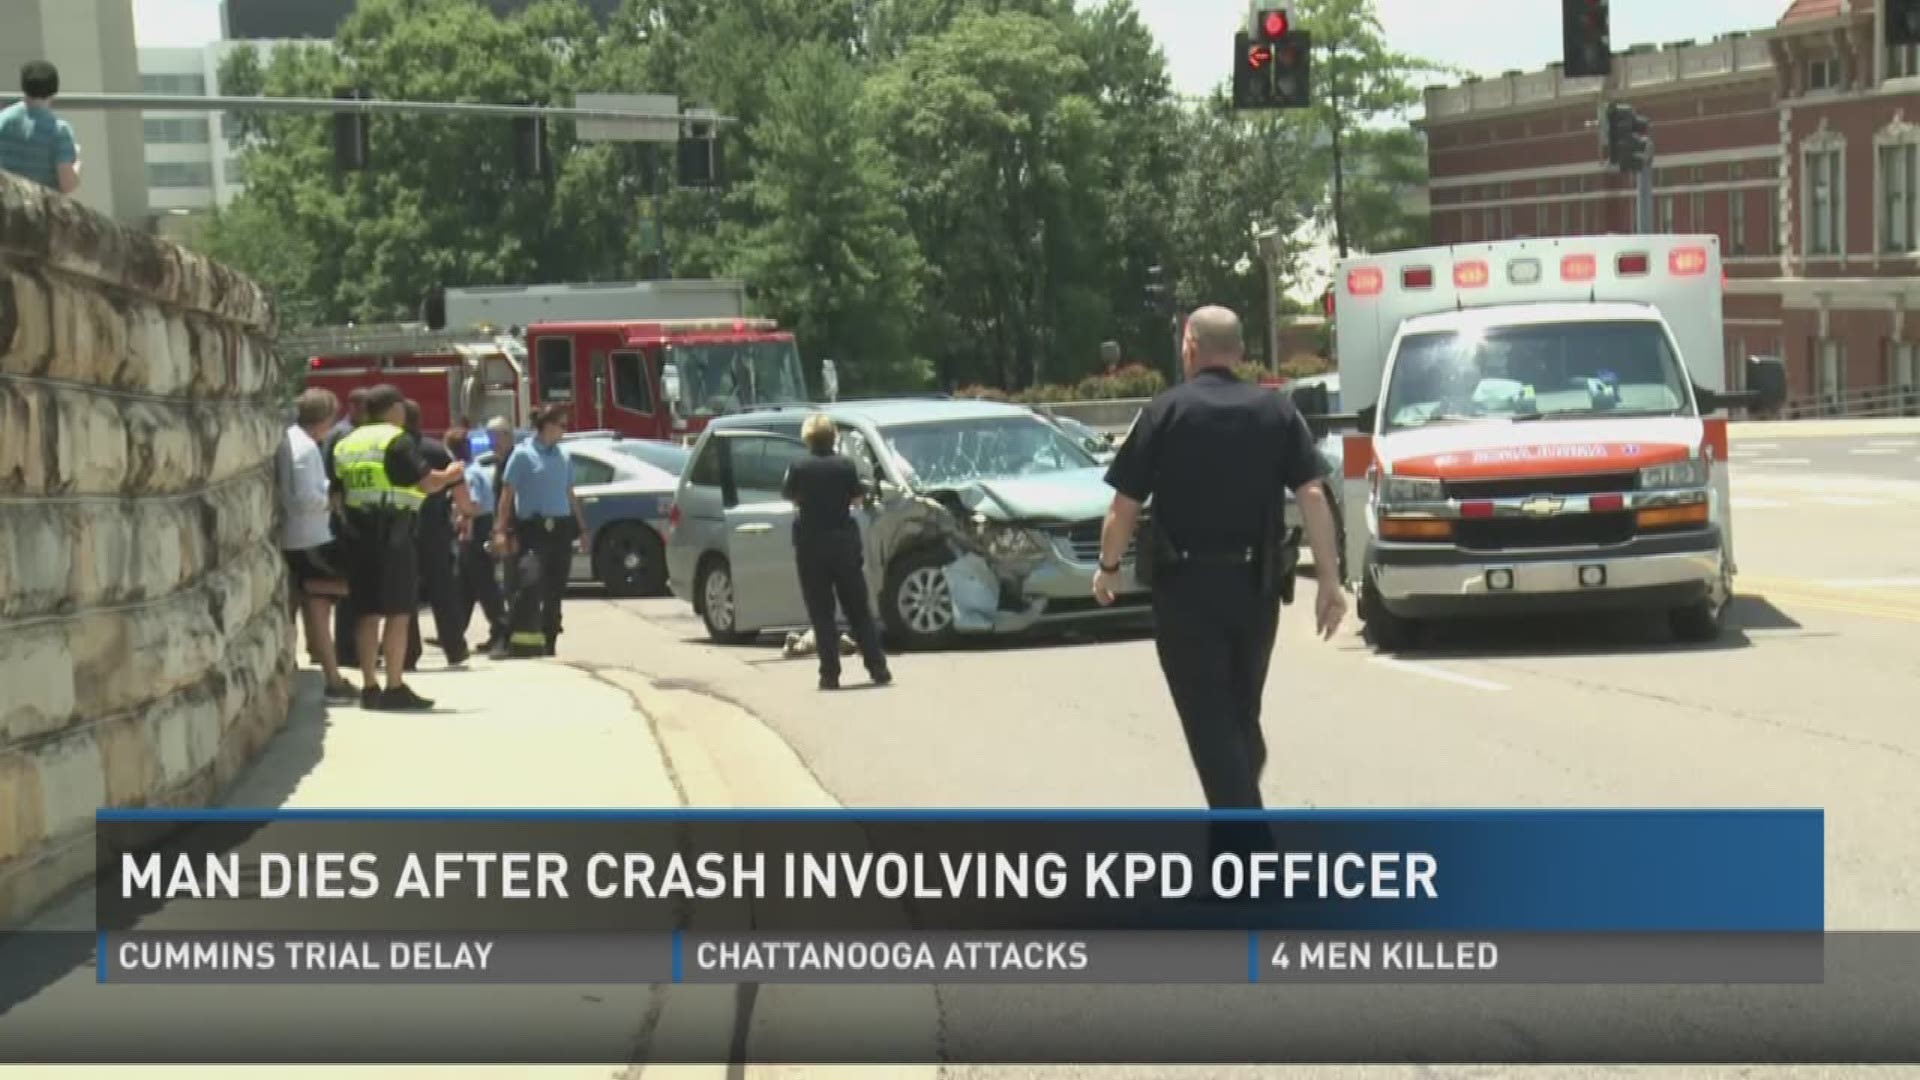 TDOT says there have been 7 crashes at the intersection where a 91-year-old man died in a crash with a KPD officer Thursday.